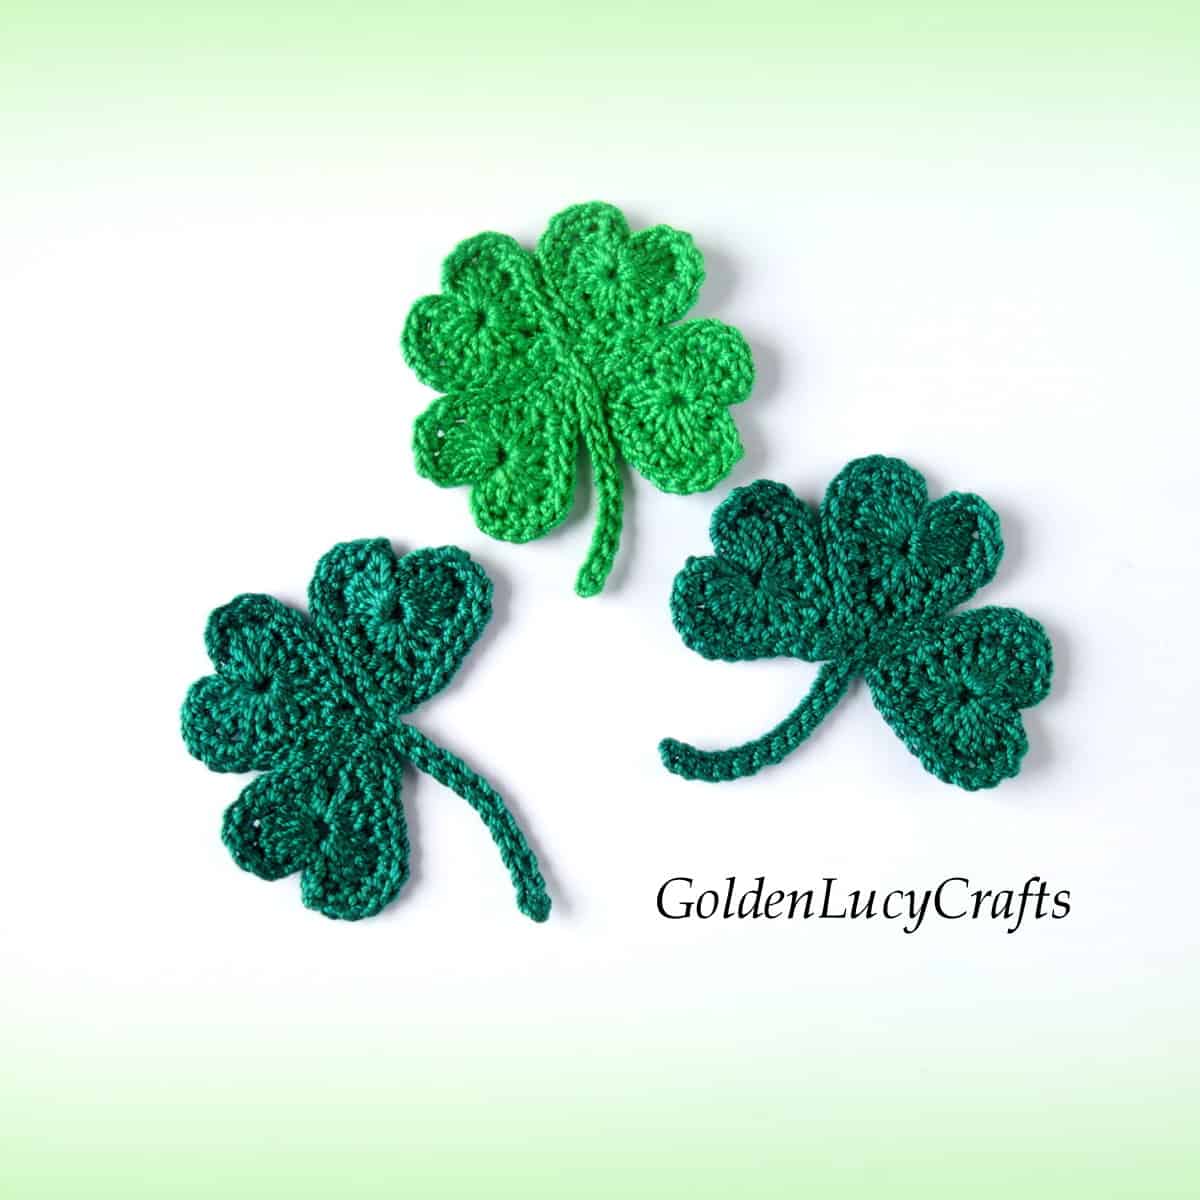 Crocheted shamrock and lucky clover appliques.